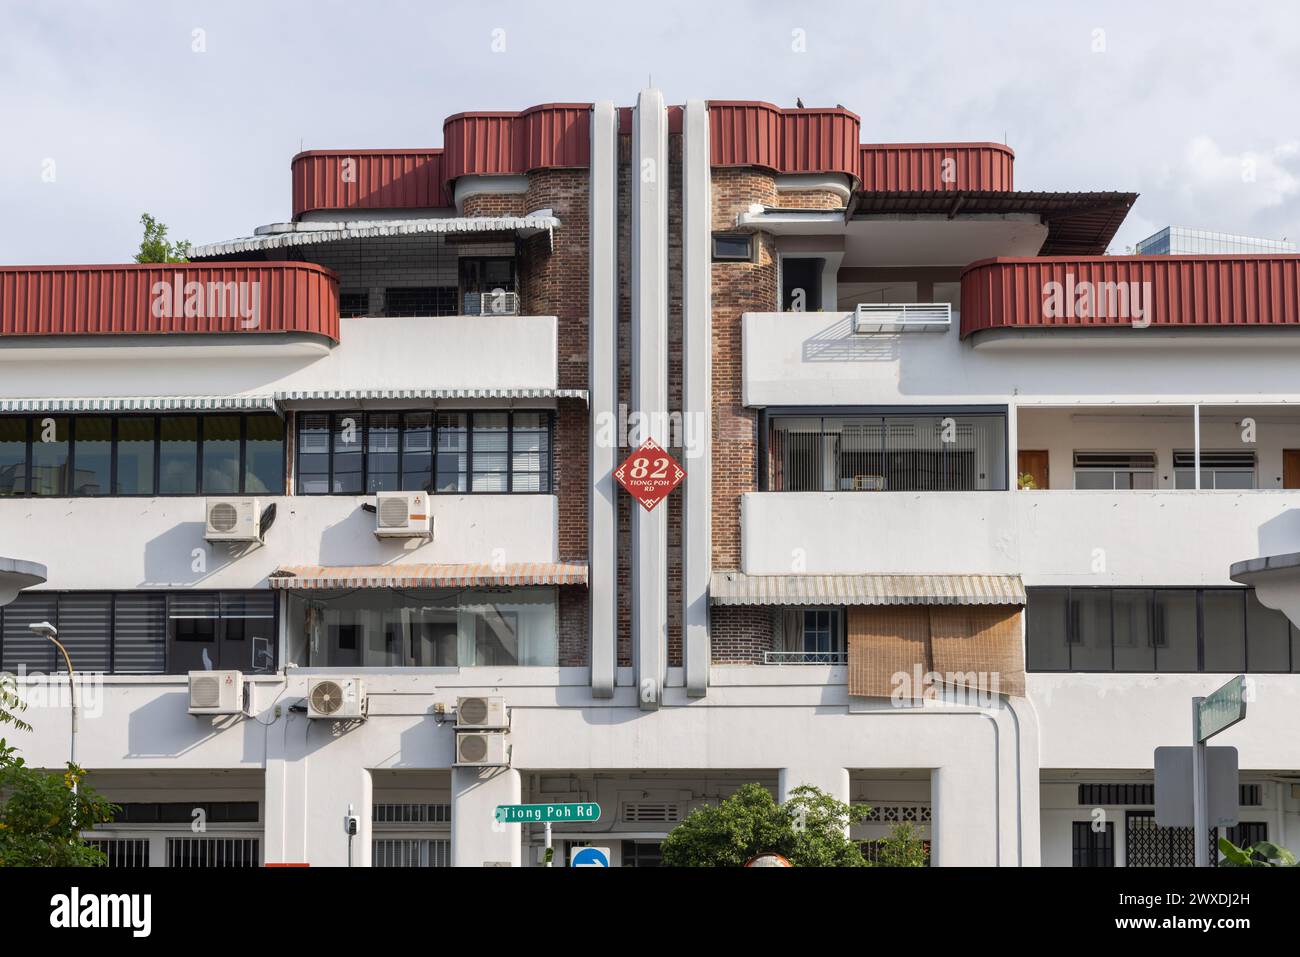 Tiong Bahru modernist walk up apartments in Singapore, designed in Streamline Moderne Style by Singapore Improvement Trust (SIT) Stock Photo